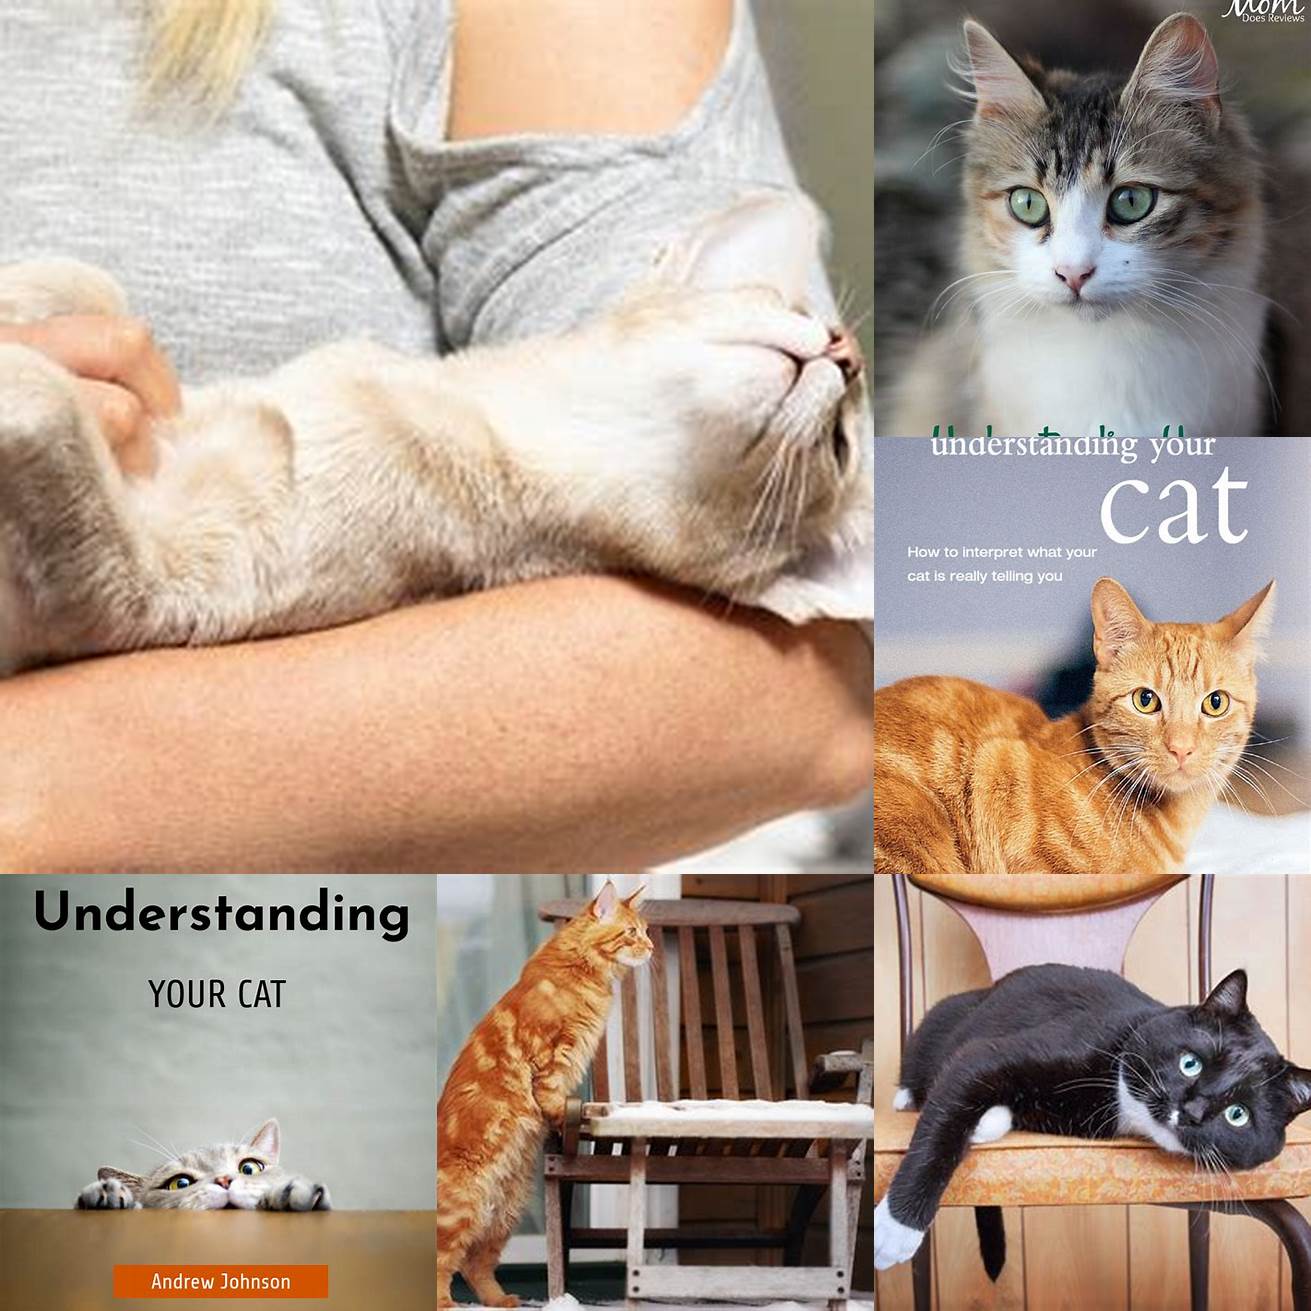 5 Being patient and understanding with your cat as they may require extra care and attention during this time